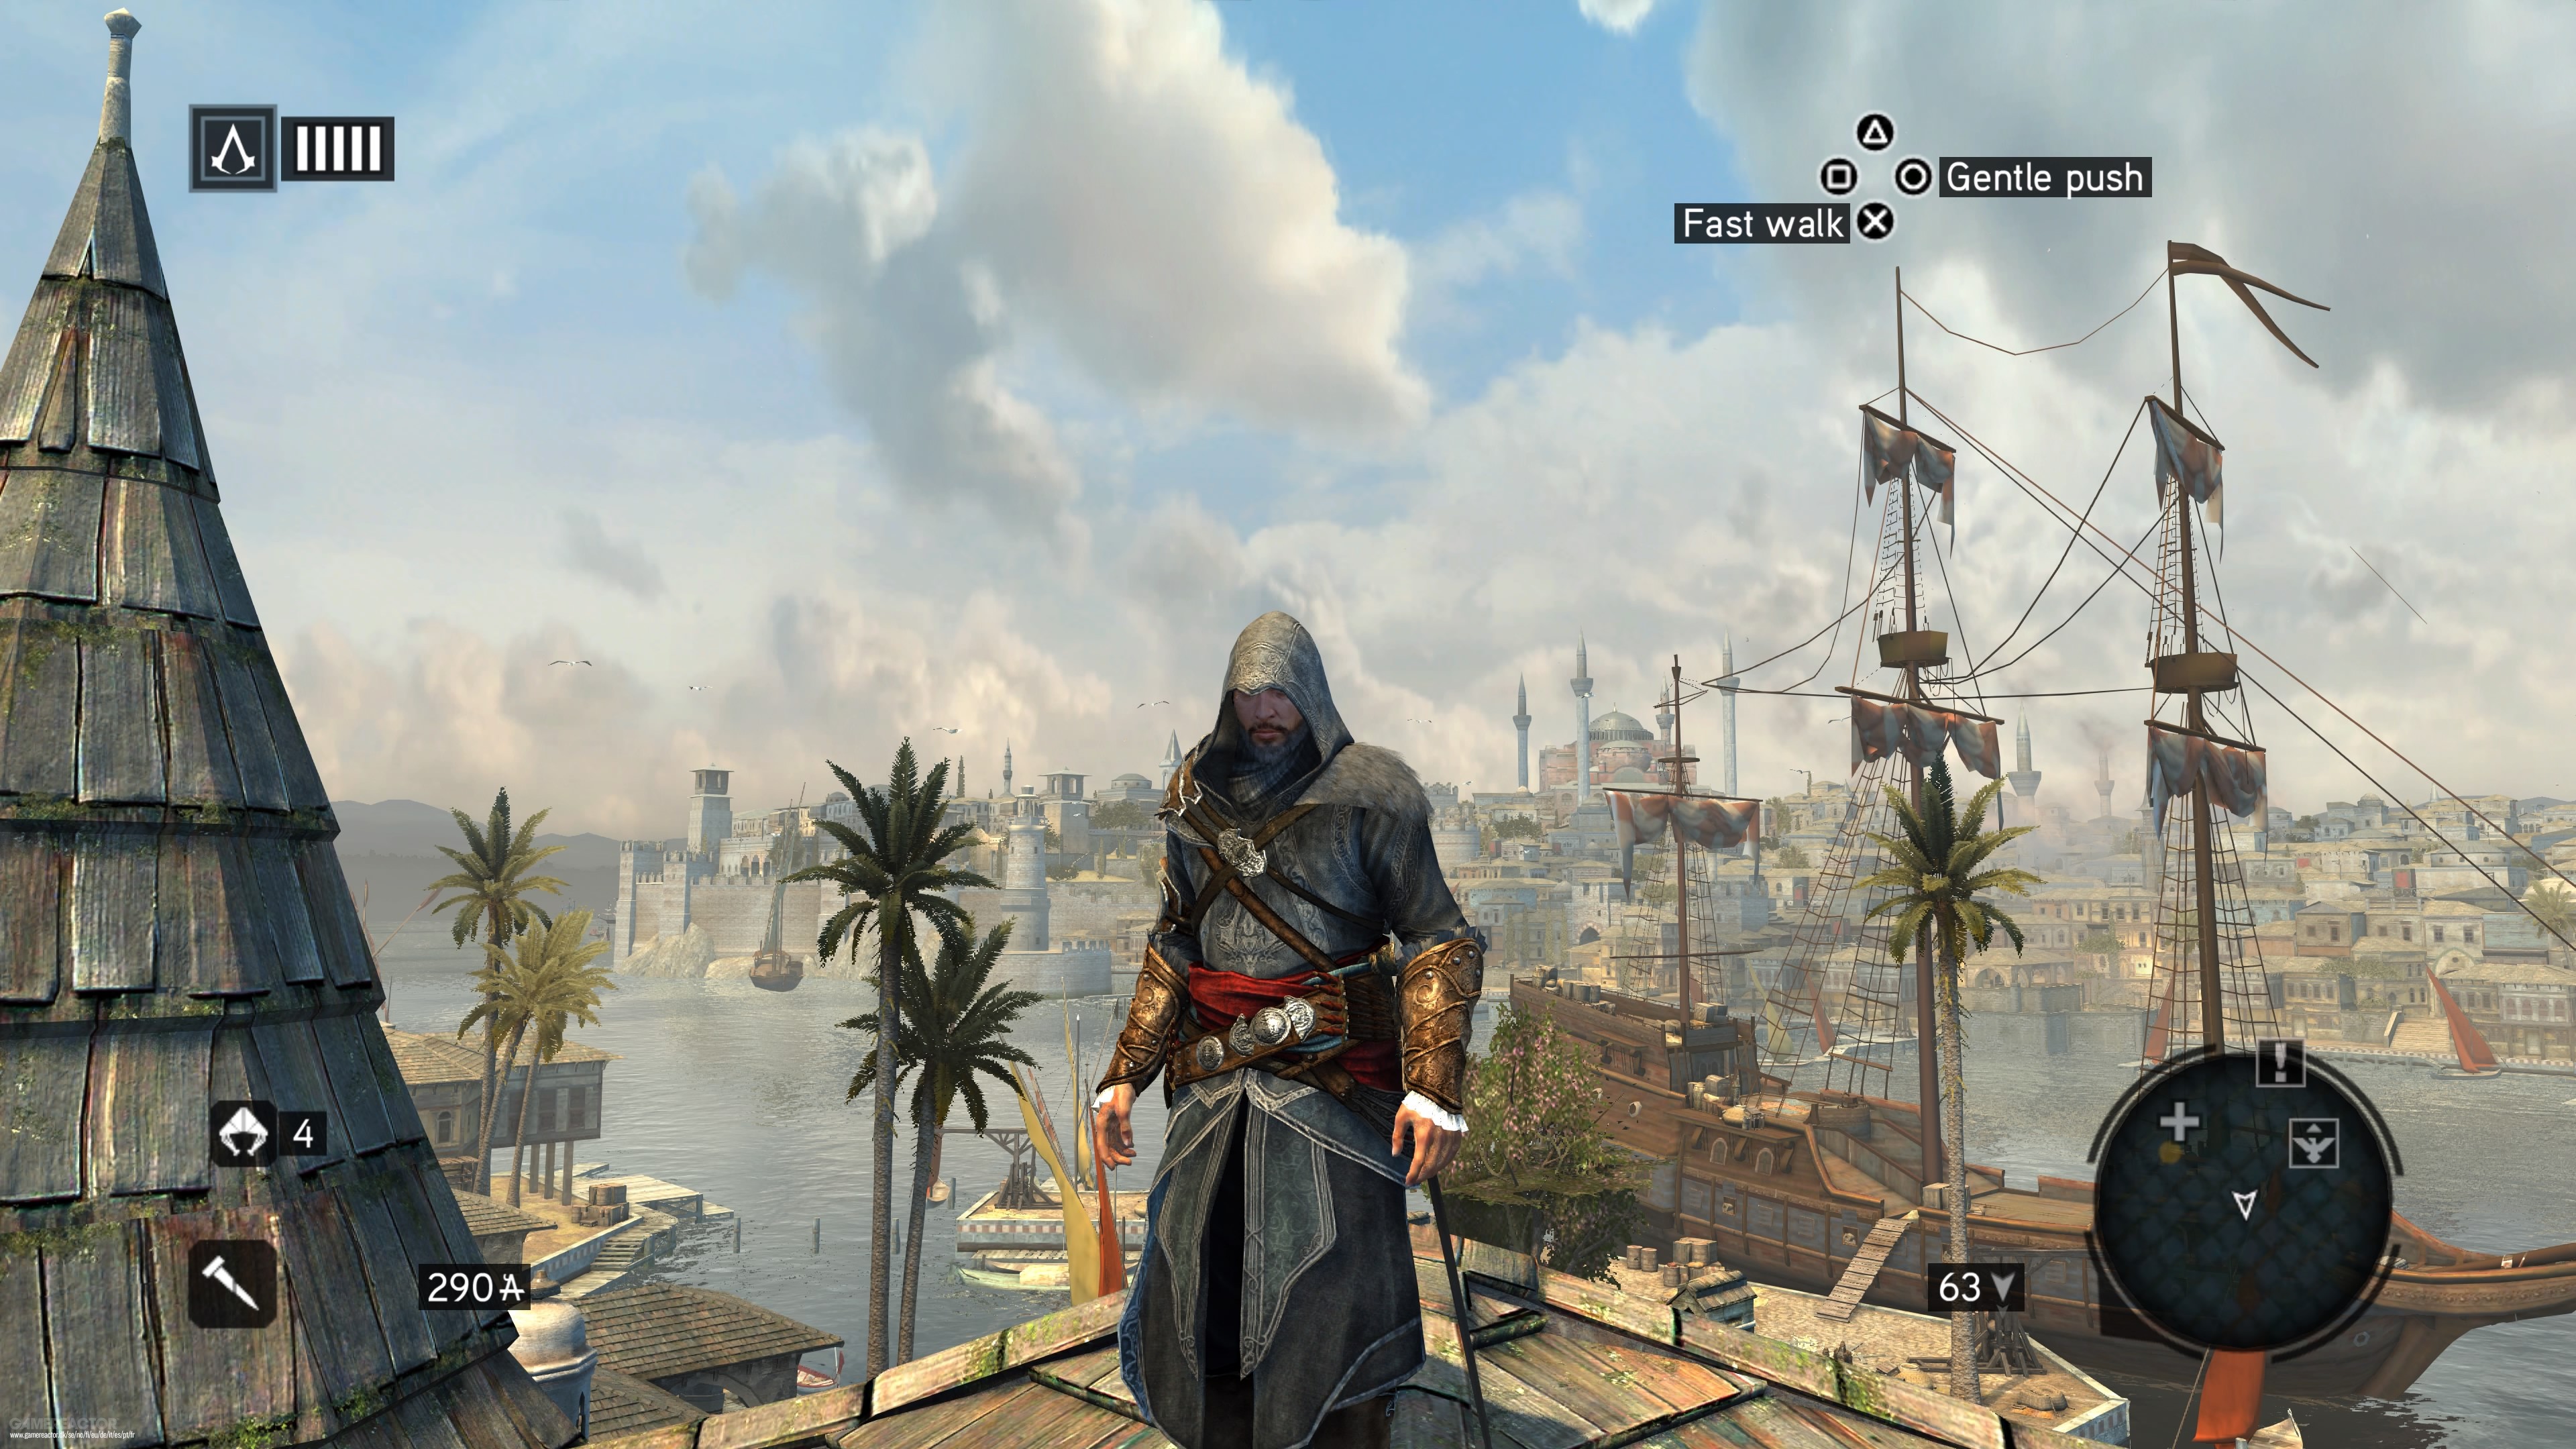 Assassin’s Creed The Ezio Collection PlayStation 4 Account Pixelpuffin.net Activation Link